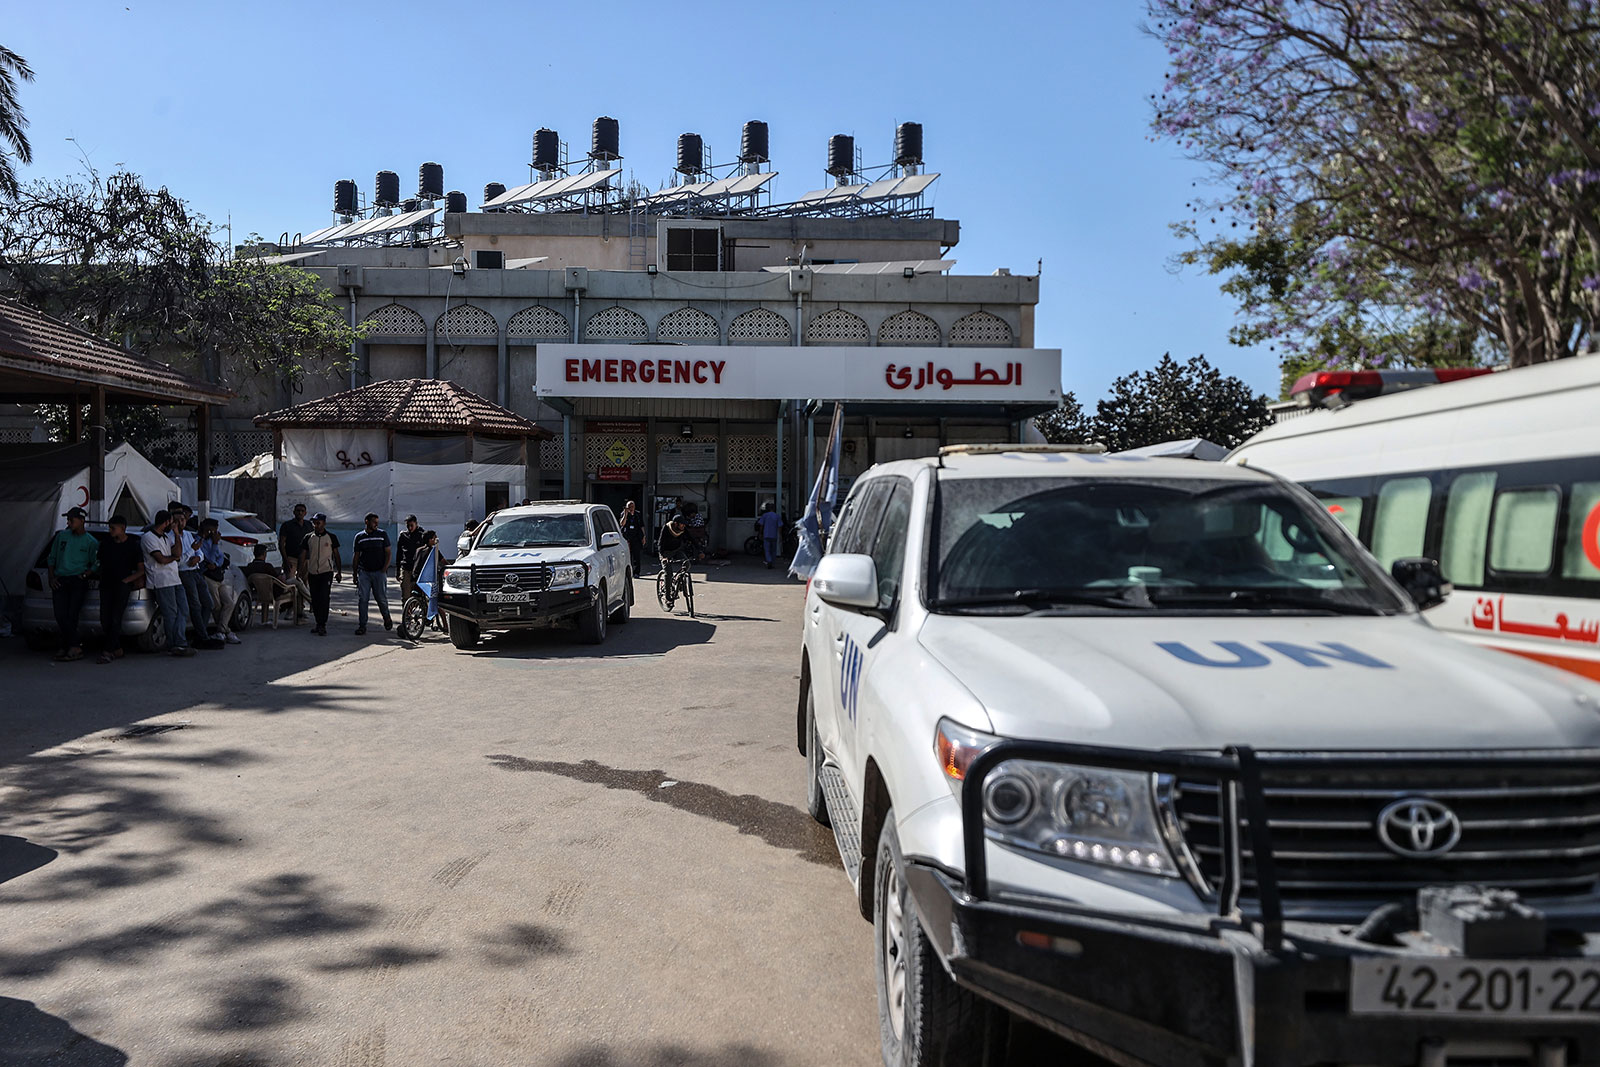 A damaged United Nations vehicle is seen in front of a hospital after a UN employee was killed in an attack on a vehicle in Gaza, according to Israeli media.